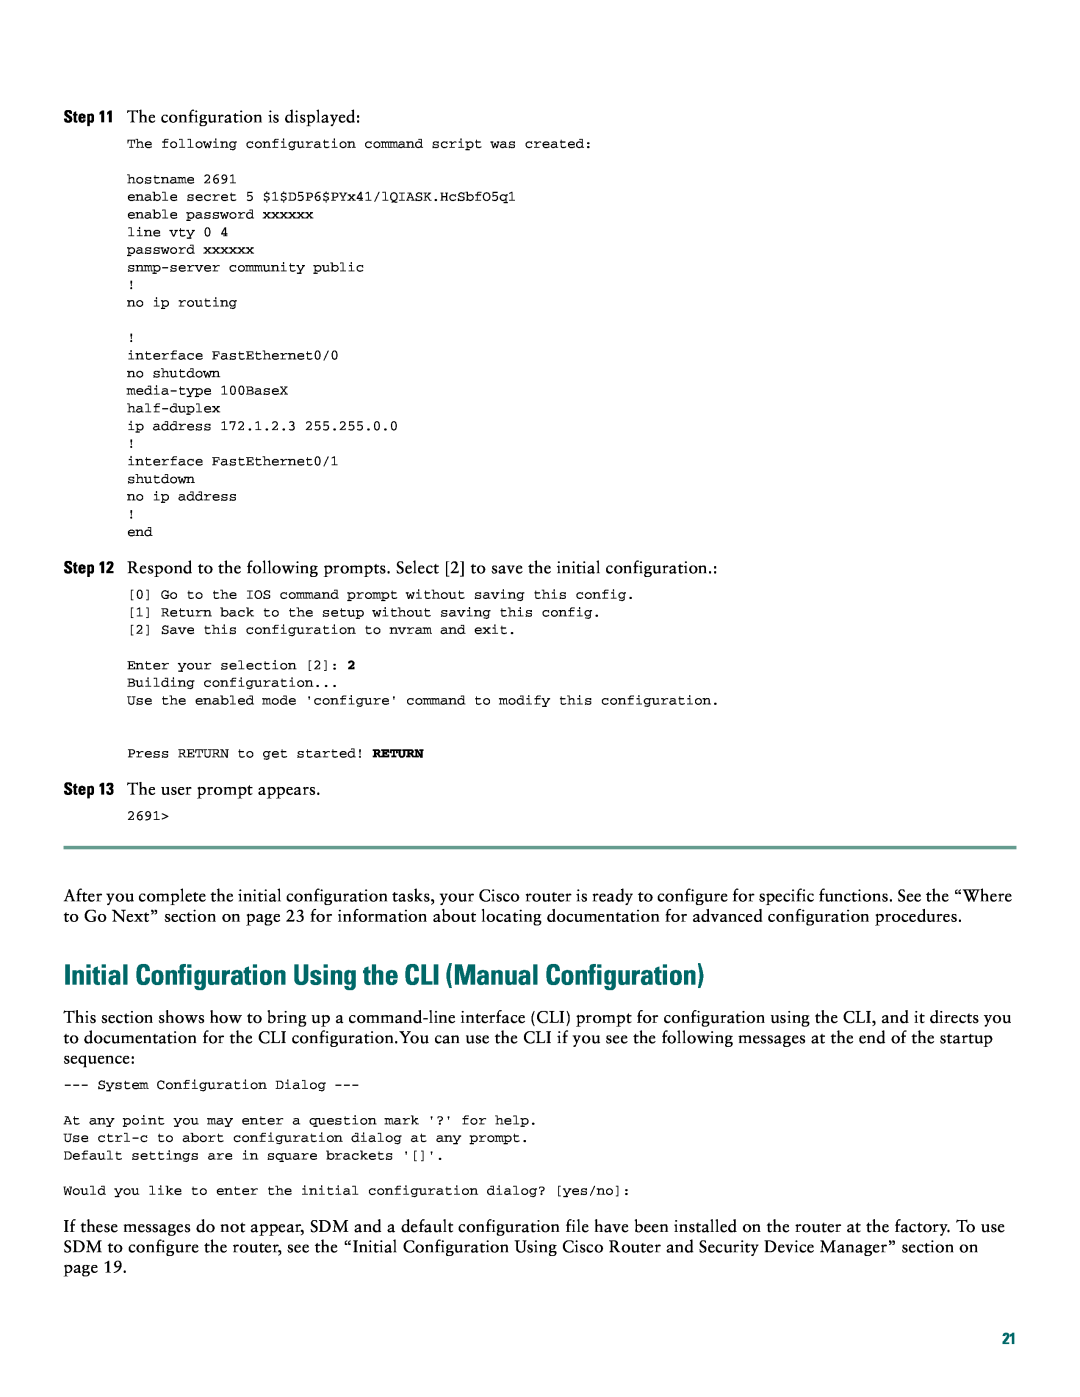 Cisco Systems 2691 quick start Initial Configuration Using the CLI Manual Configuration 